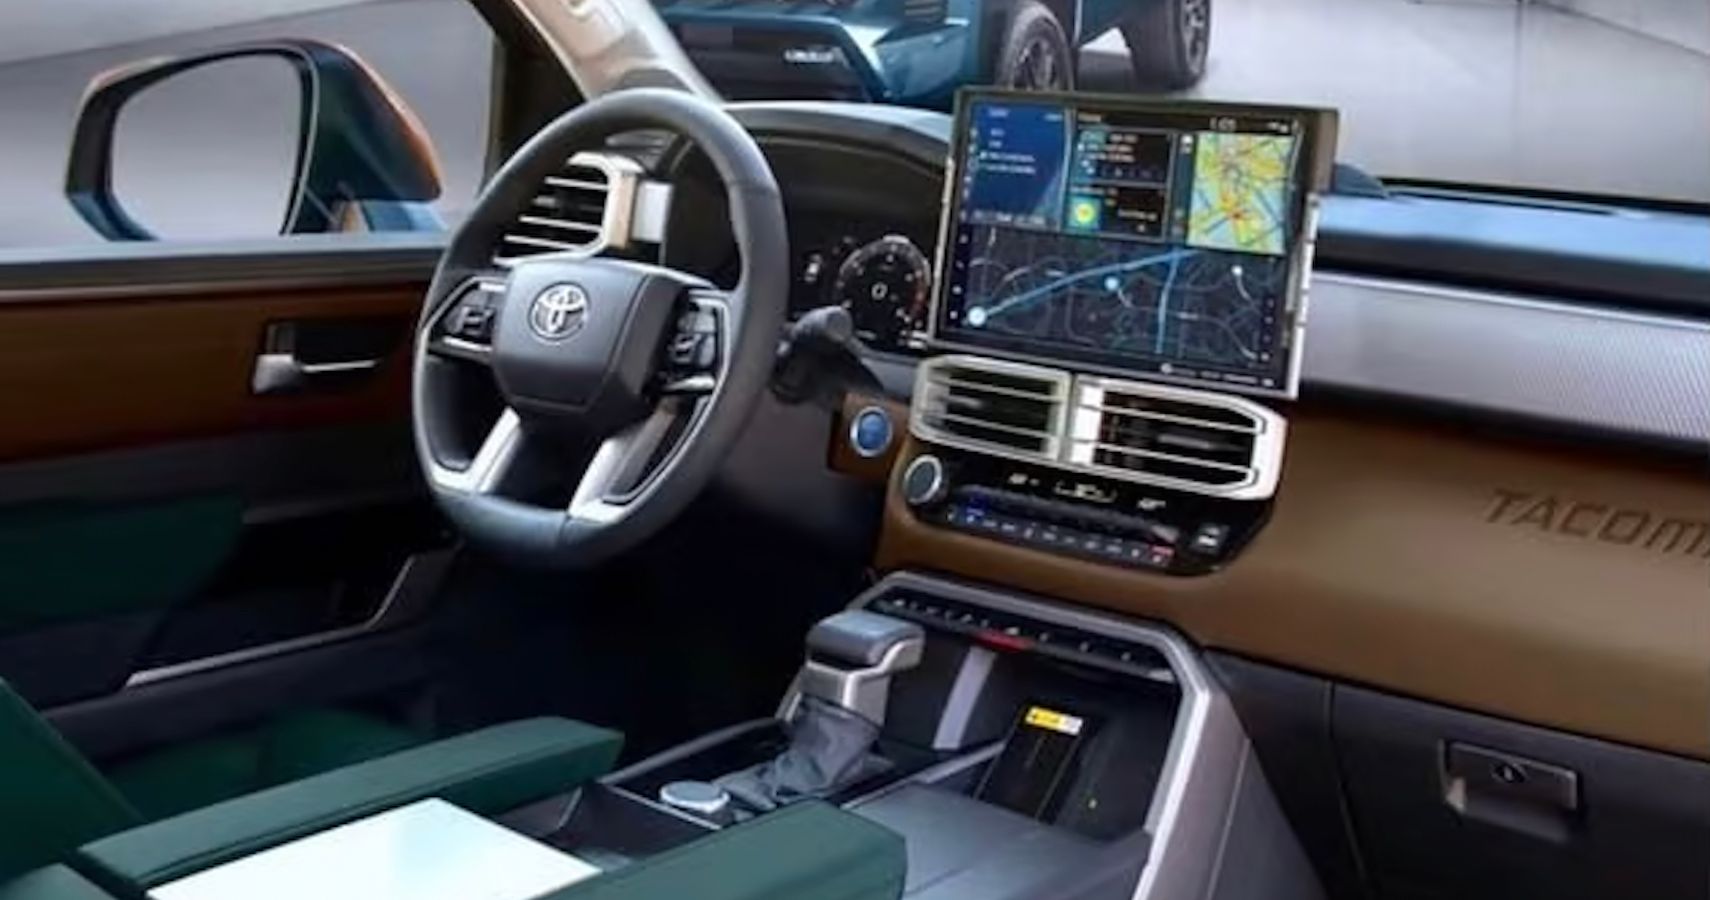 2024 Toyota AllNew Interior Revealed In Leaked Image Here's